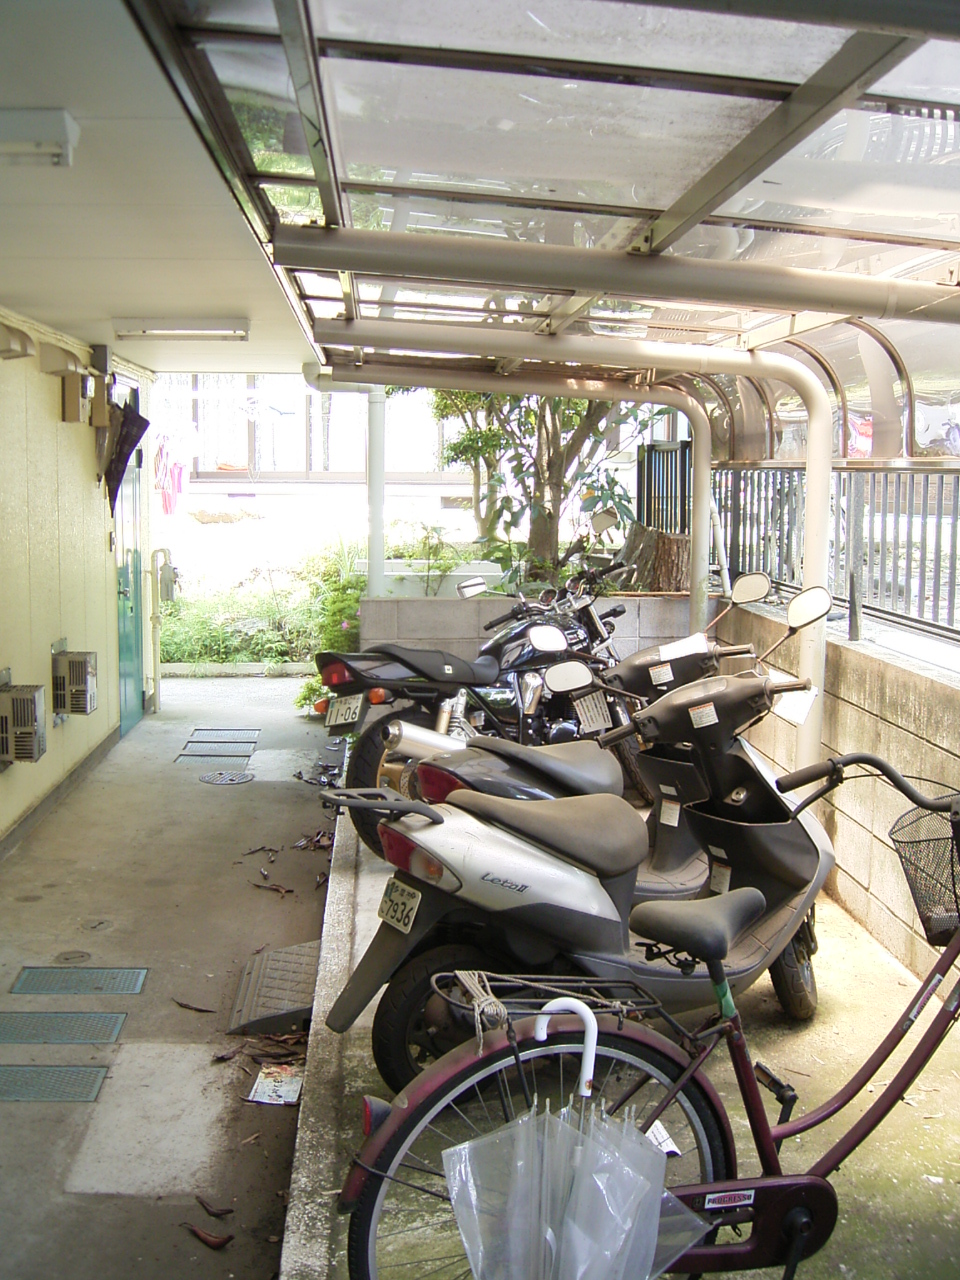 Other common areas. Bikes and bicycles will be stopped